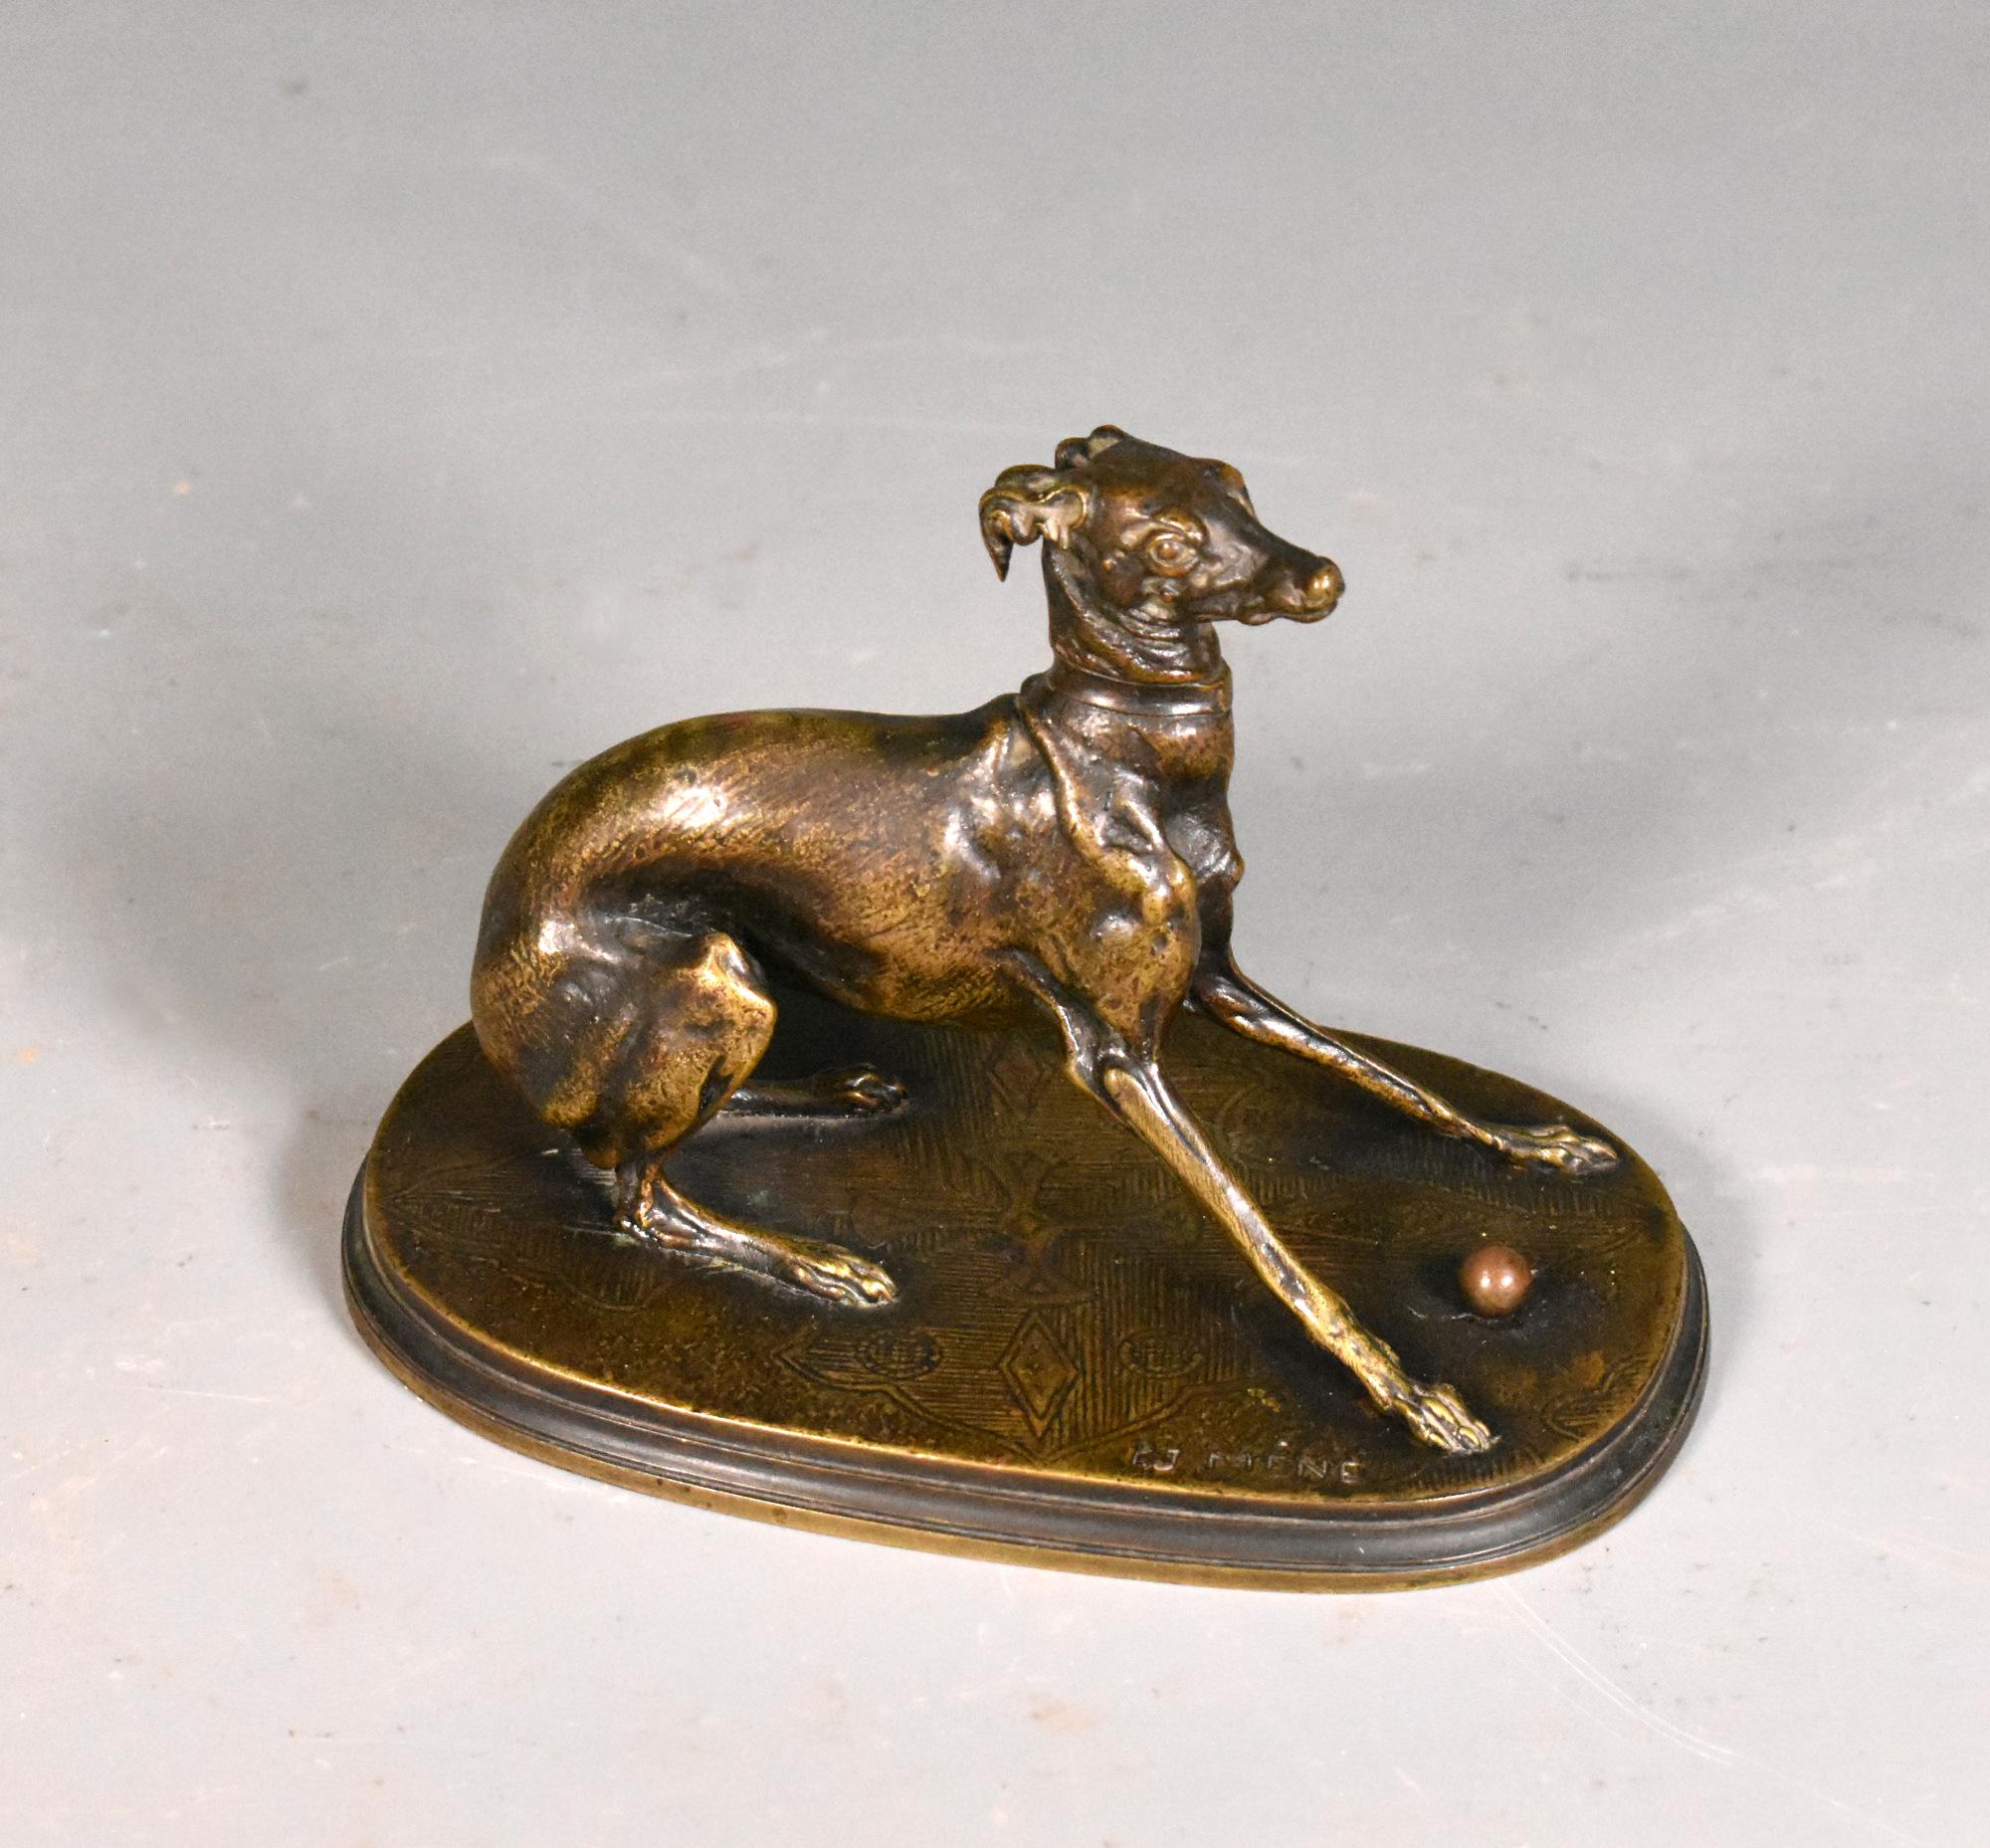 Greyhound with Ball in Bronze by Pierre-Jules Mène (1810-1879)

This delightful greyhound has been captured in a playful pose by the sculptor Pierre-Jules Mène, one of the foremost members of the school of French 'Animalier' Sculptors and a